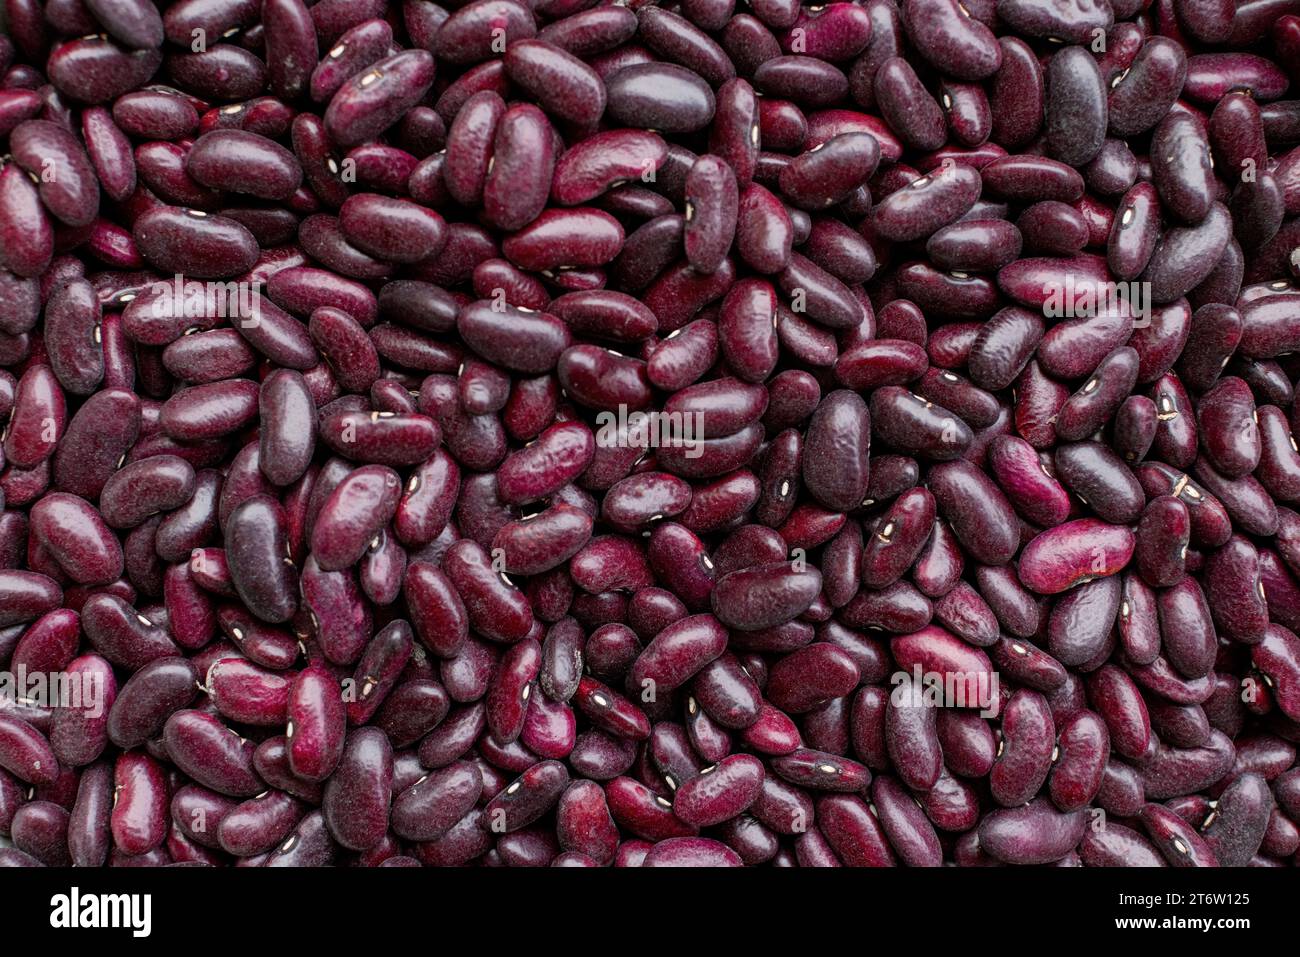 A pile of assorted beans in a variety of colors, scattered across the surface in a disorganized fashion Stock Photo